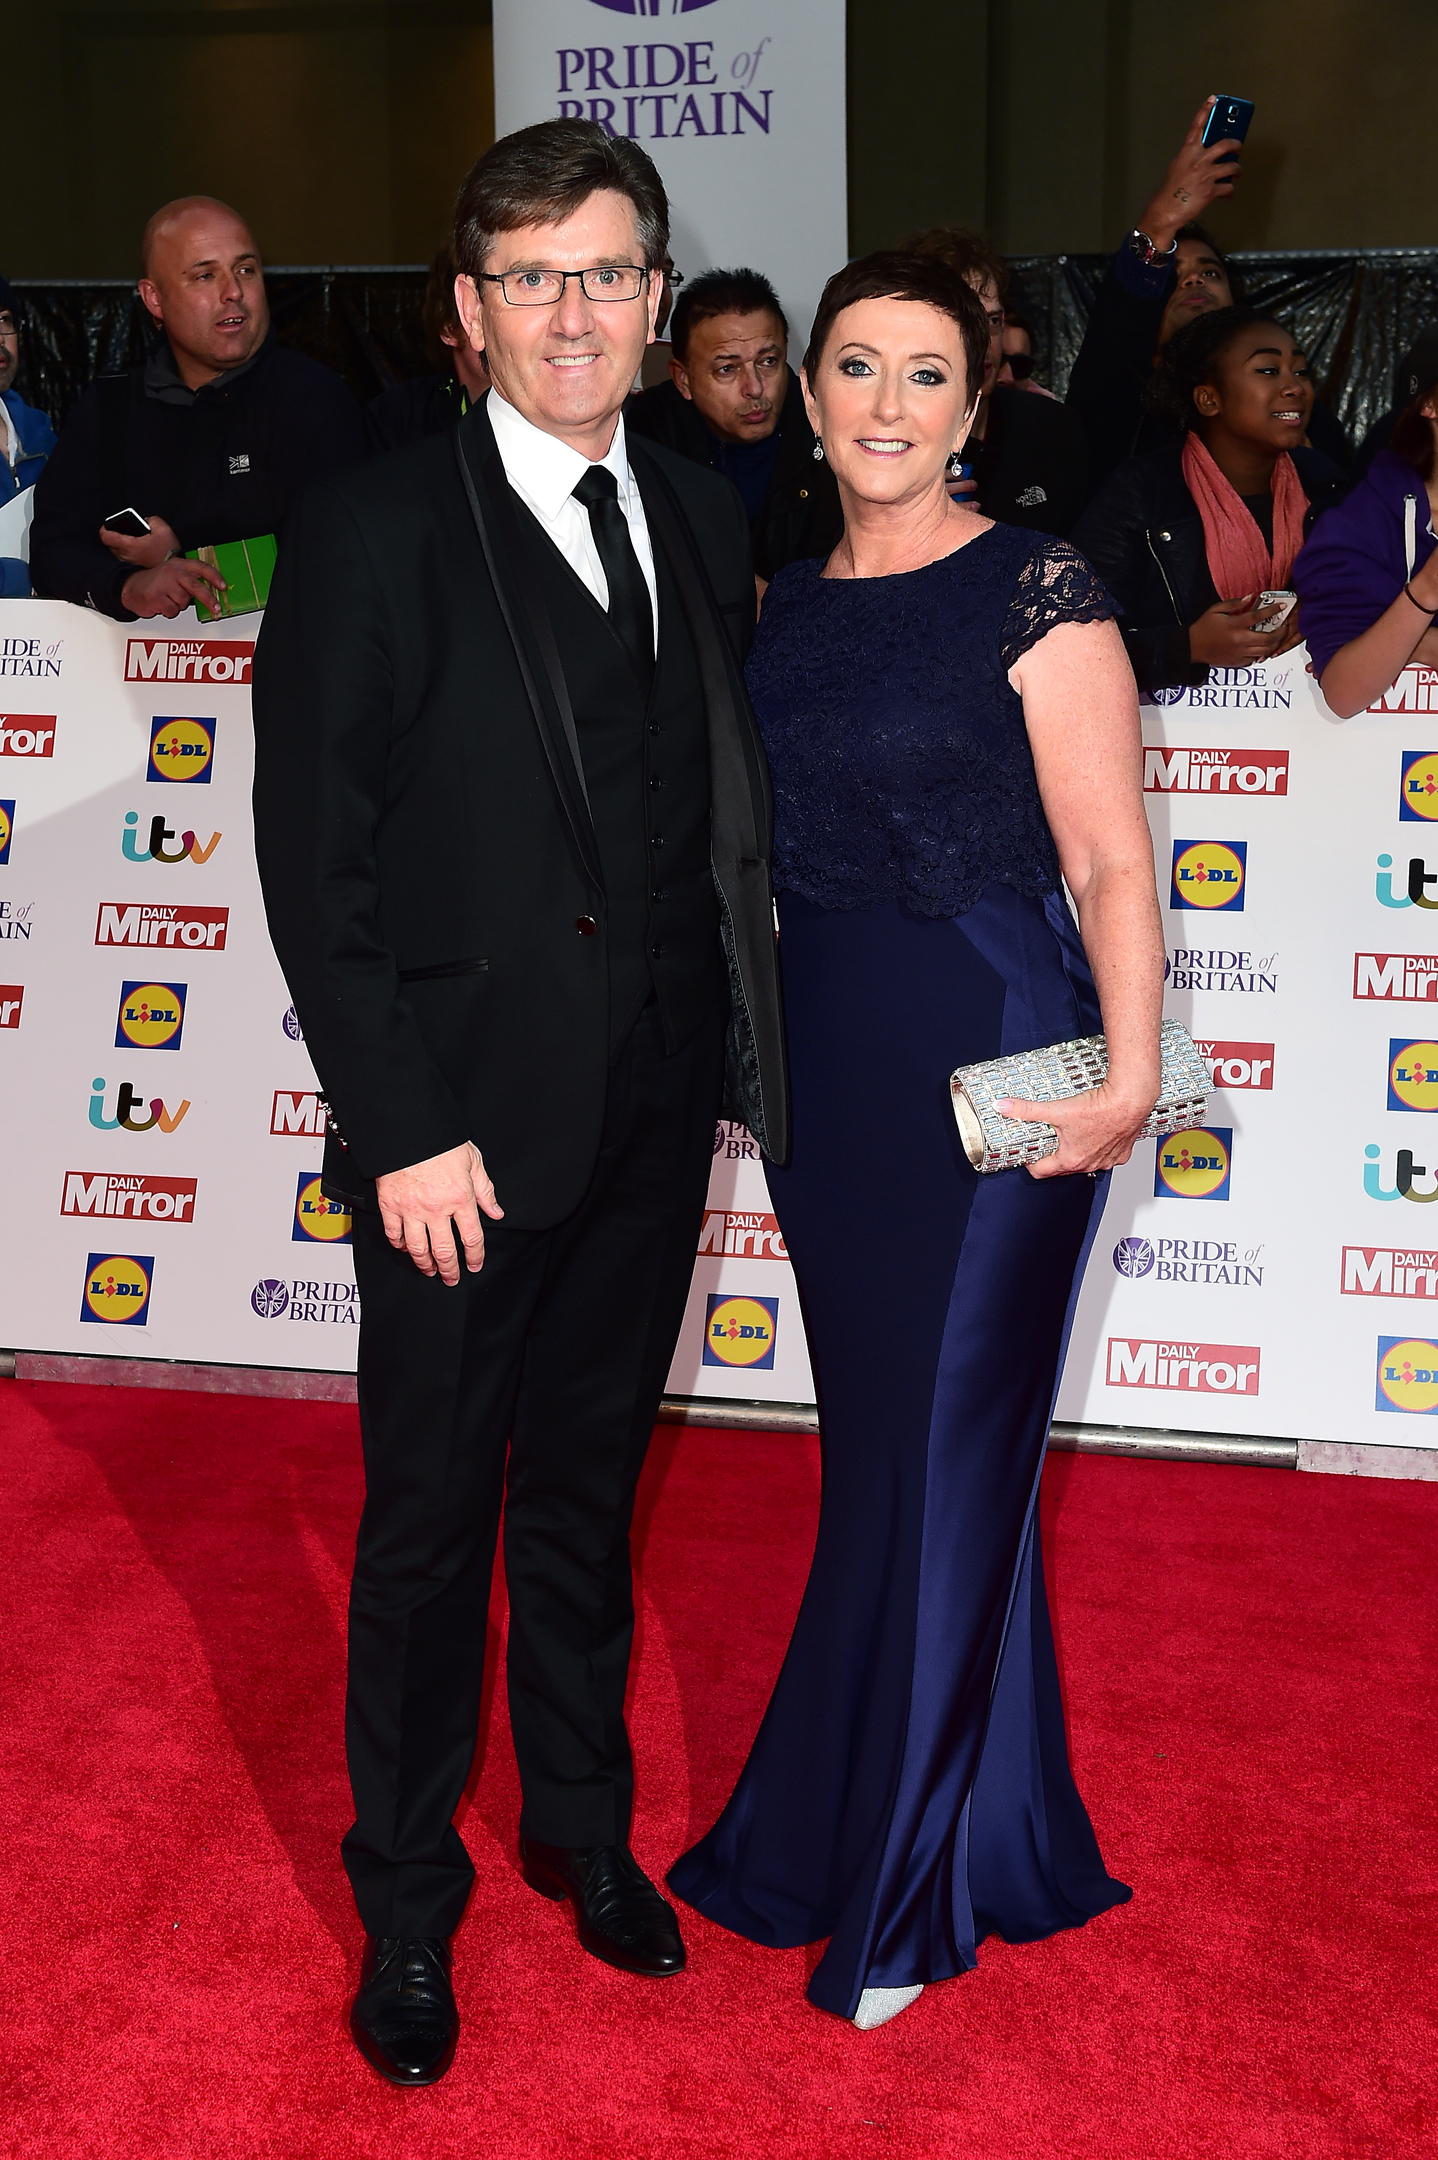 Daniel and Majella O'Donnell at The Pride of Britain Awards 2015 (Guy Levy)